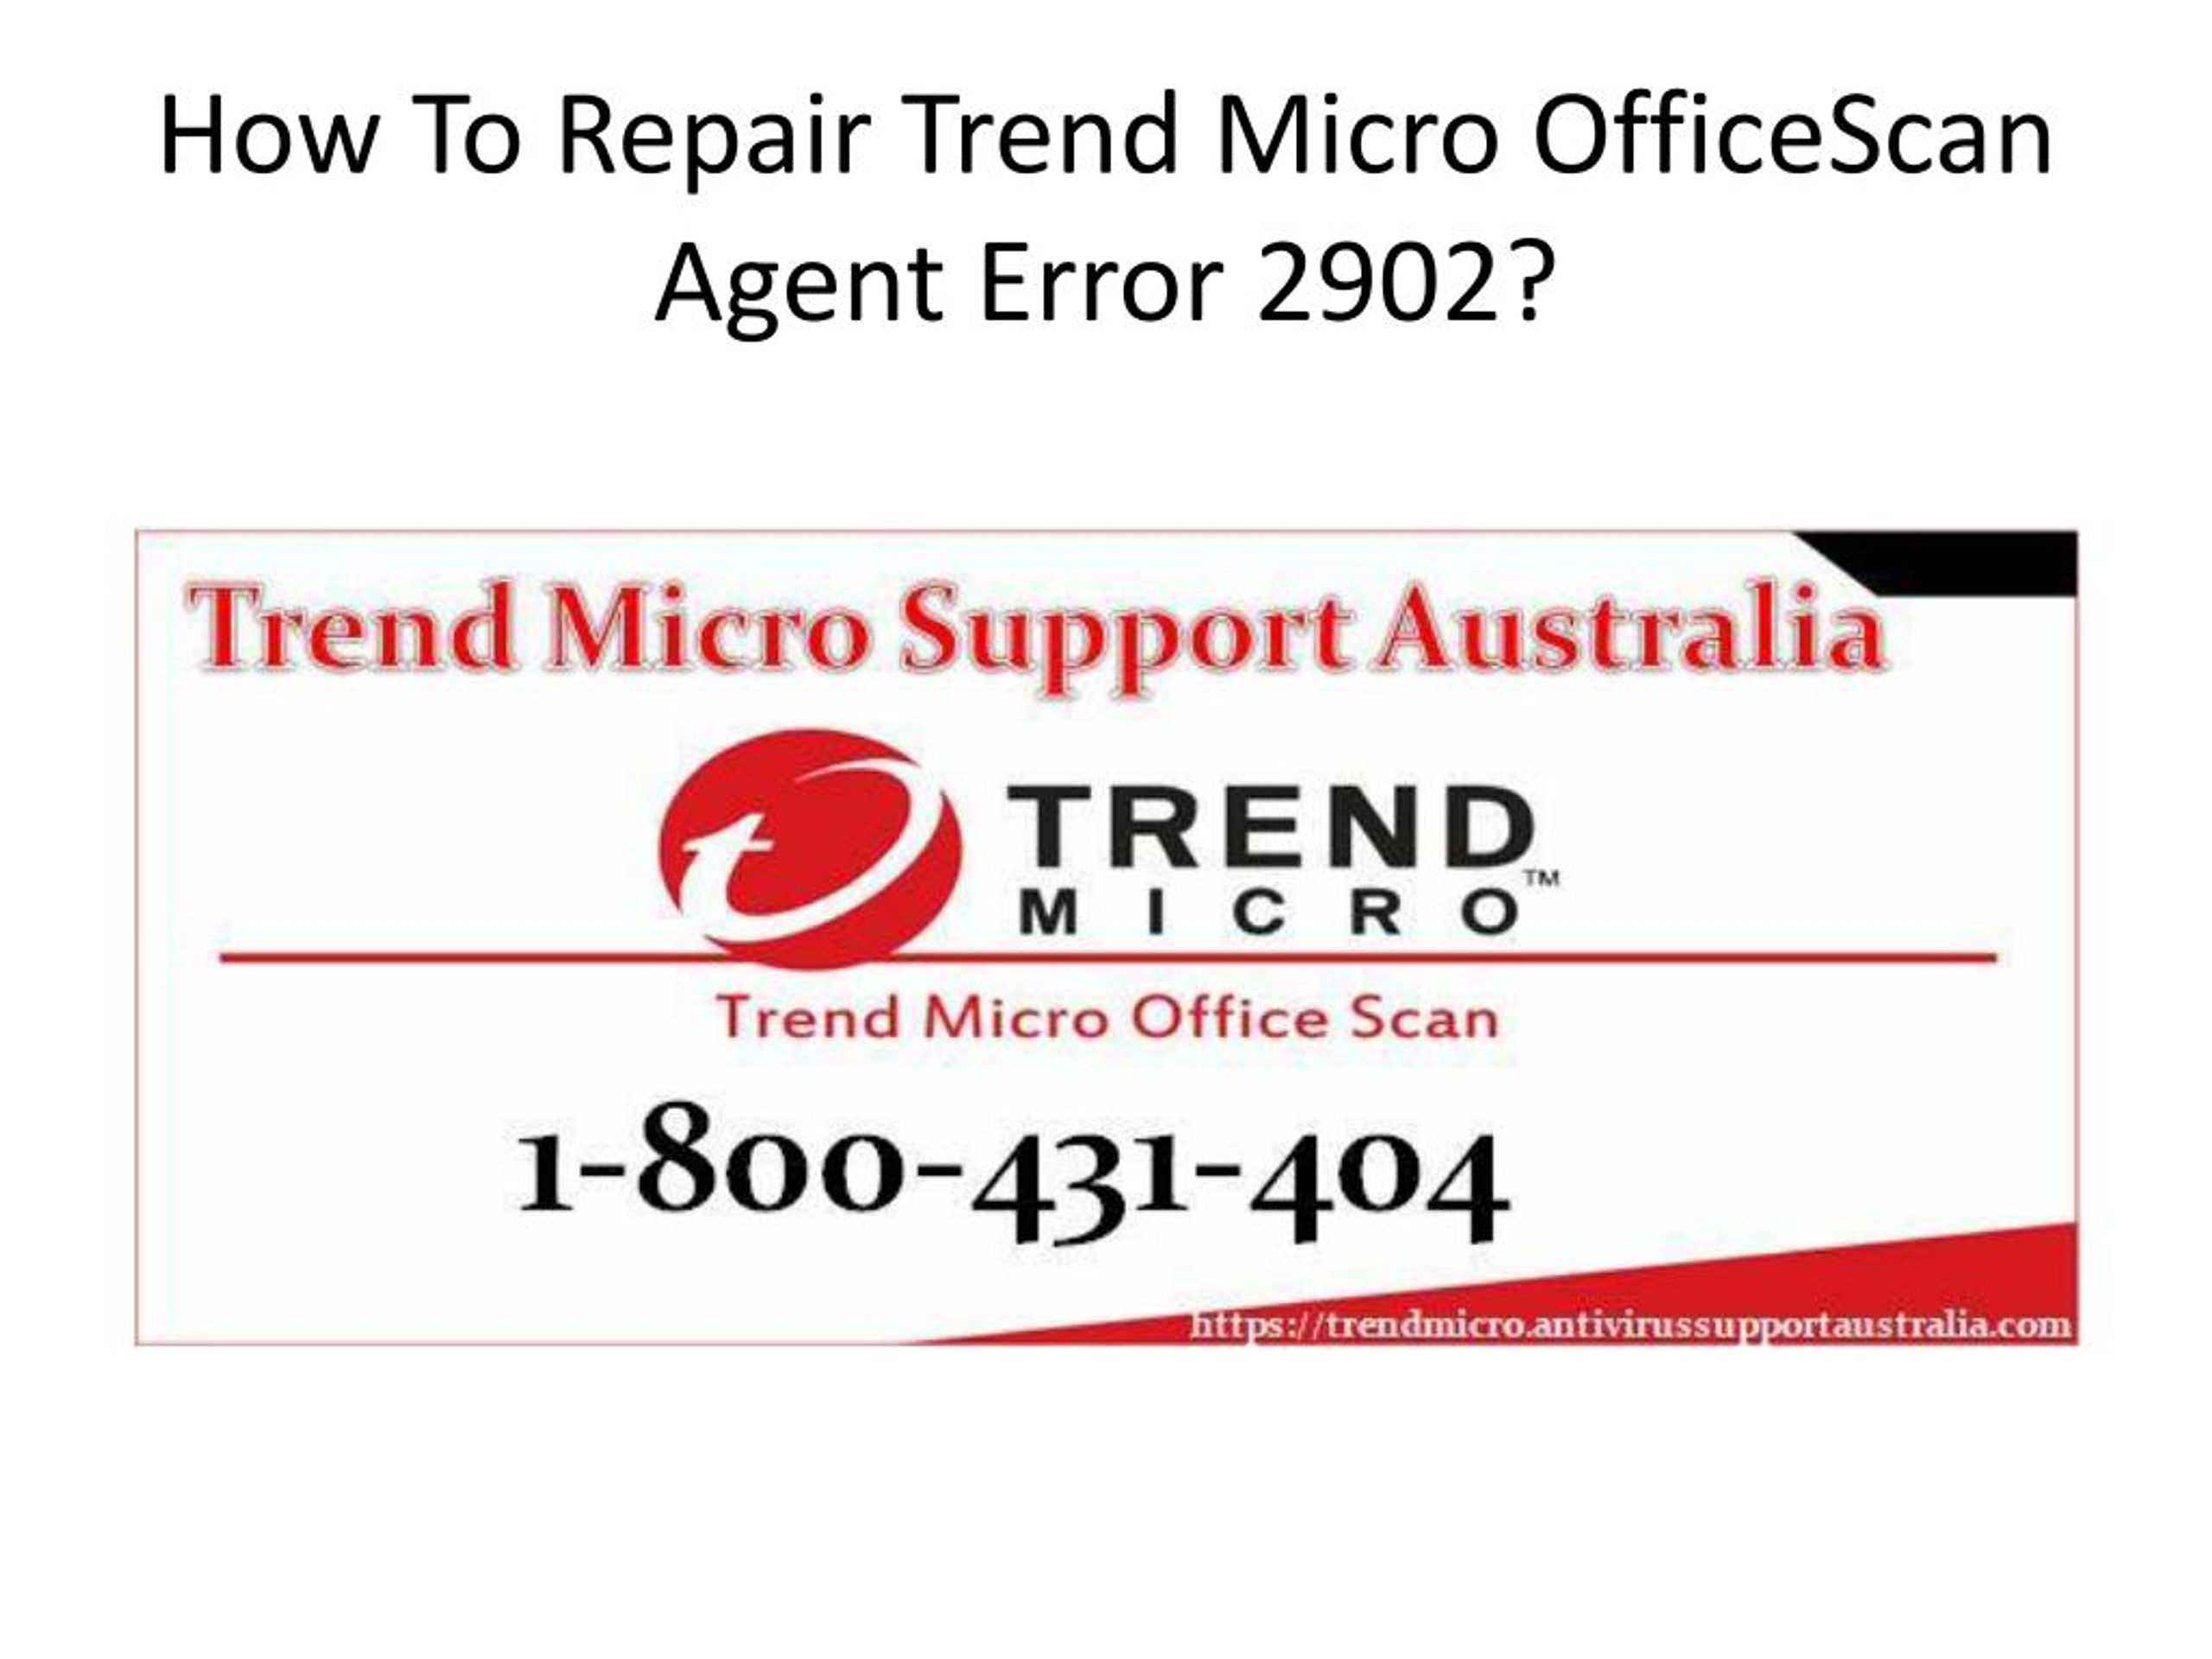 PPT - How To Repair Trend Micro OfficeScan Agent Error 2902? PowerPoint  Presentation - ID:8028301